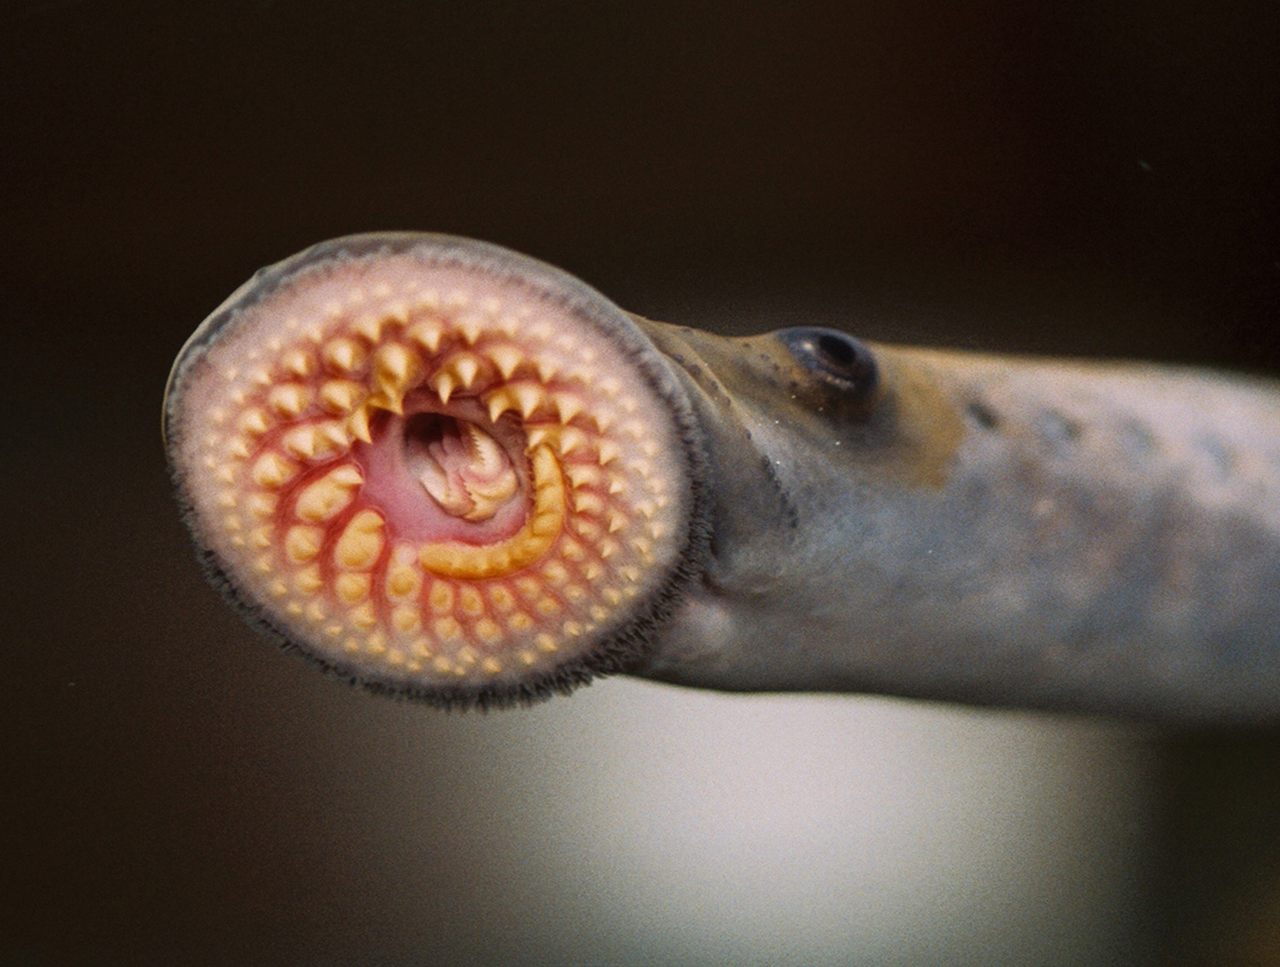 A sea lamprey that's clearly ready for its close-up—and for a new appreciation of its role in its native ecosystems. 